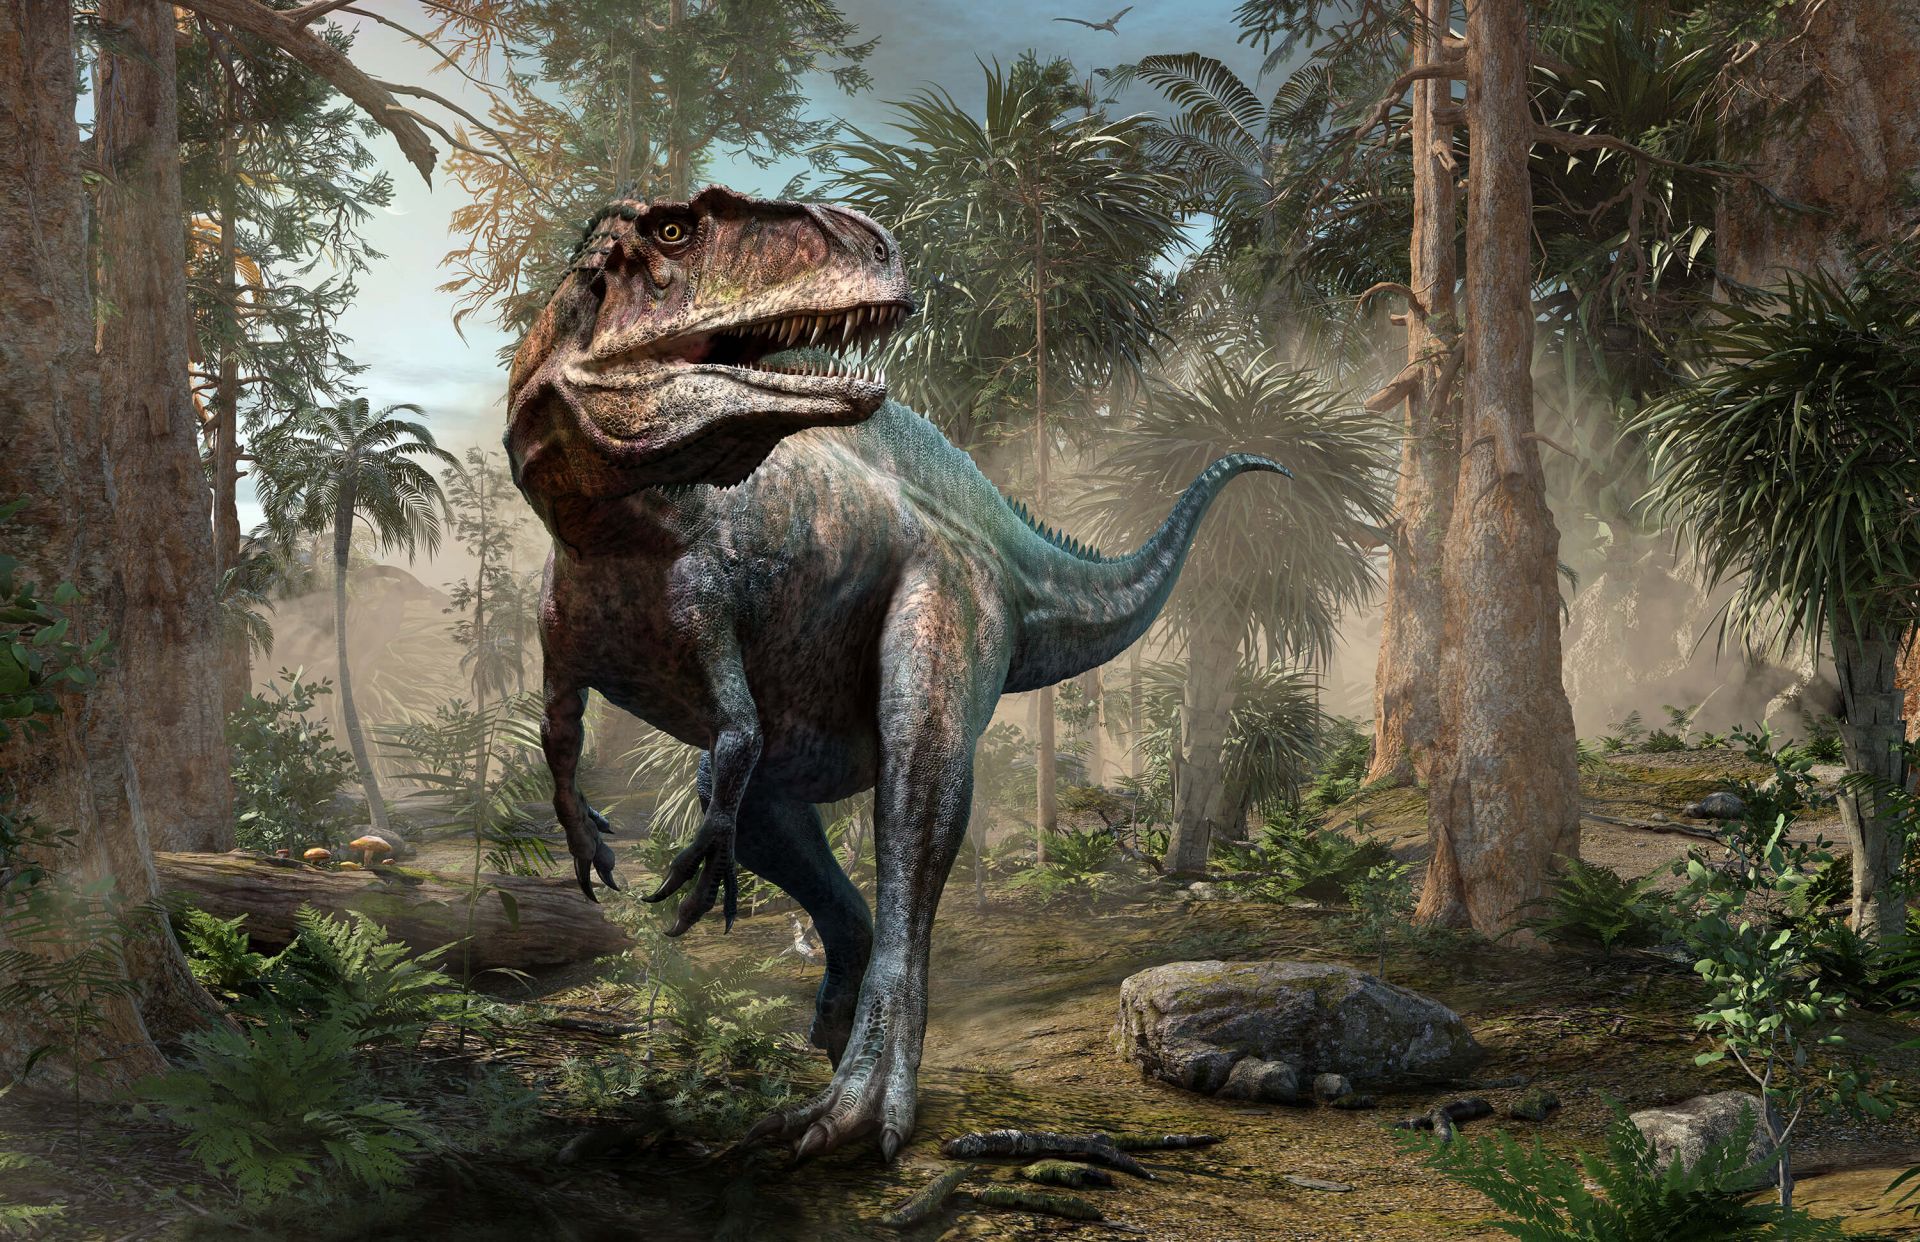 Acrocanthosaurus in forest - Wallpaper